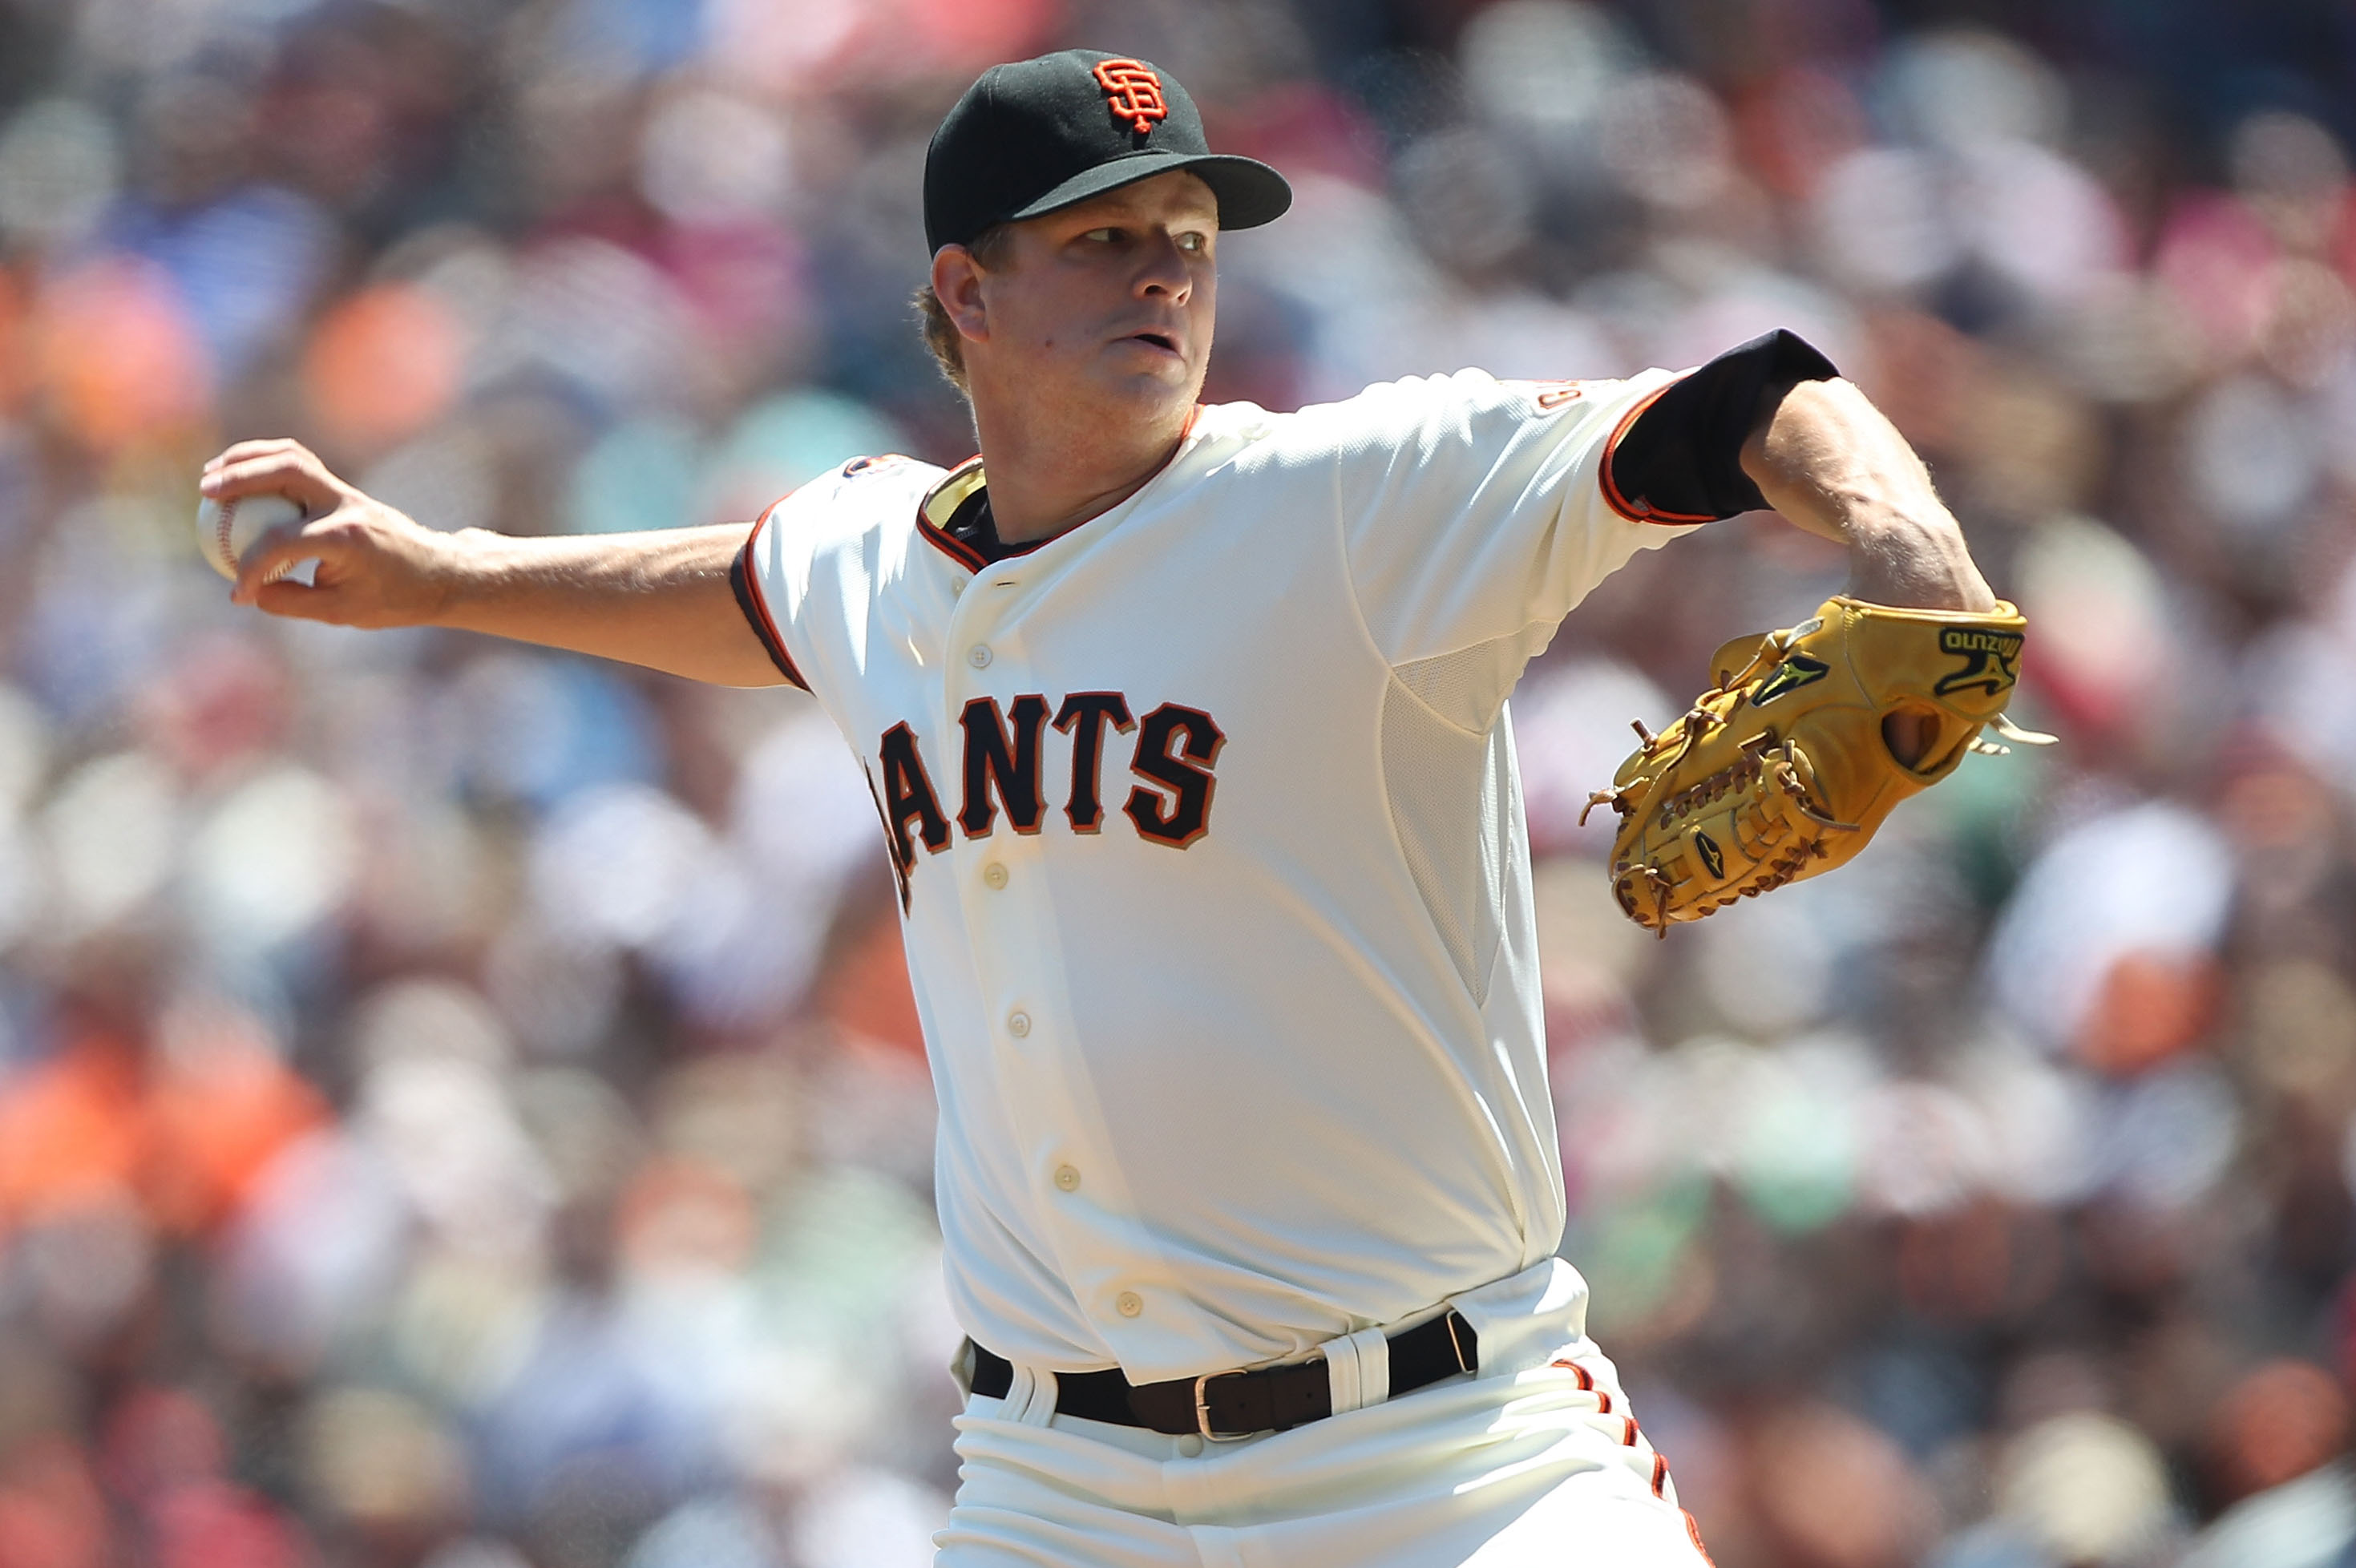 San Francisco Giants - Relive Matt Cain's perfect game, tonight at 7pm on  NBC Sports Bay Area / California. It's not the same, but it's baseball.  Let's enjoy it together ⚾️ #PerfectCain, #SFGiants